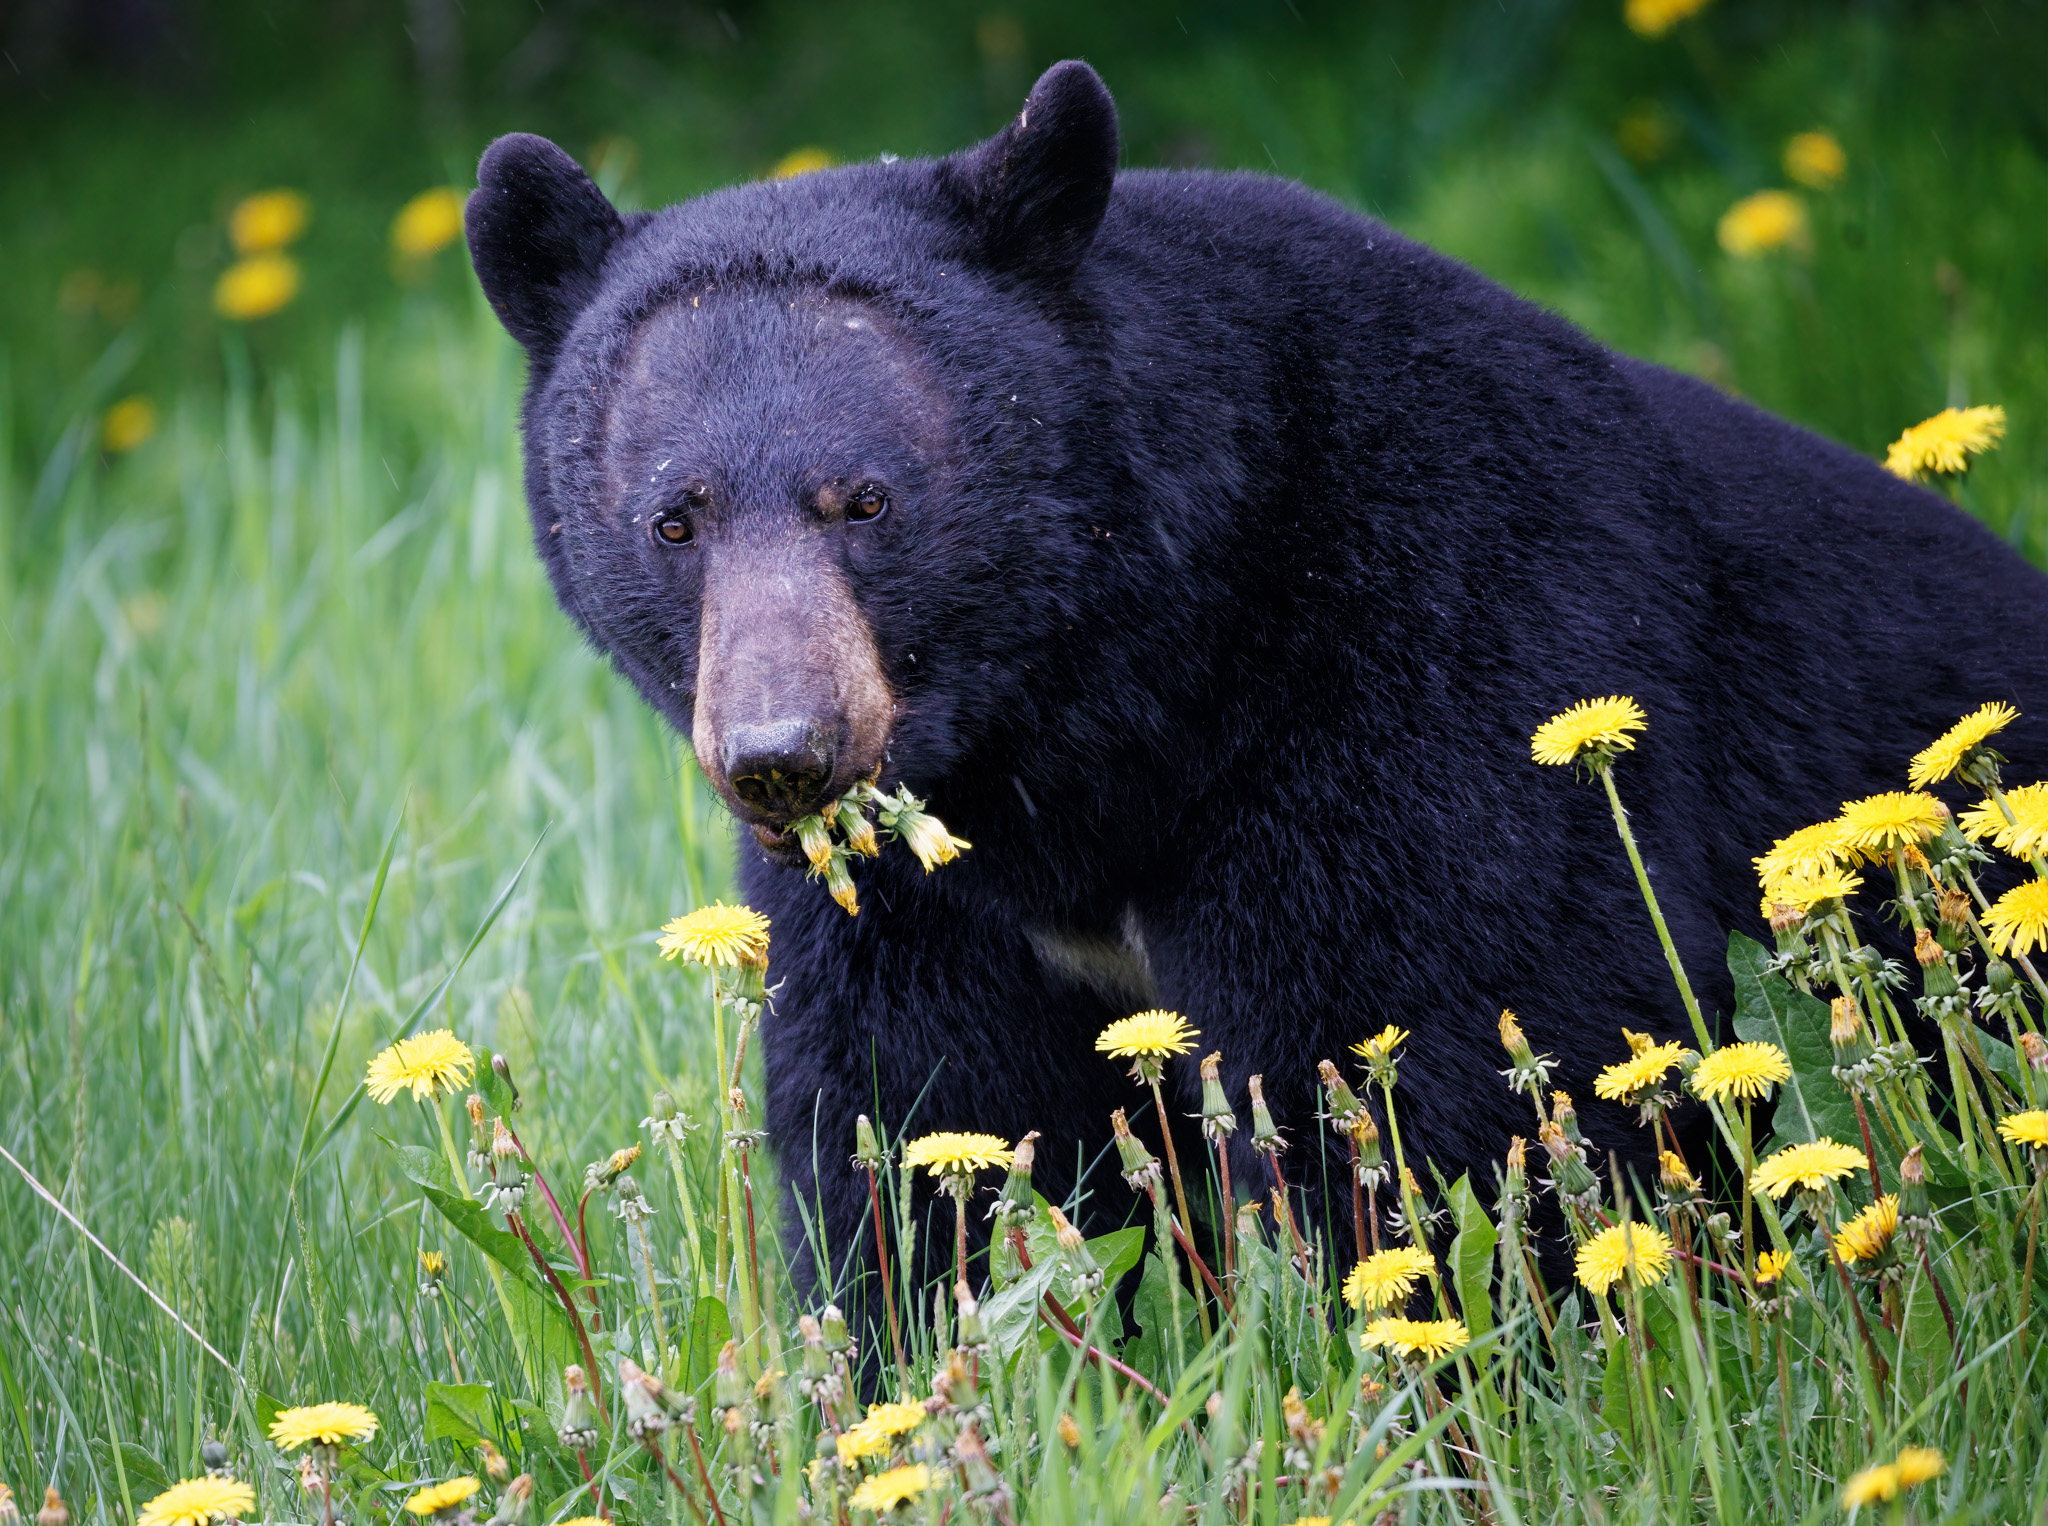 What does a black bear eat? In this case, a mouthful of dandelions.